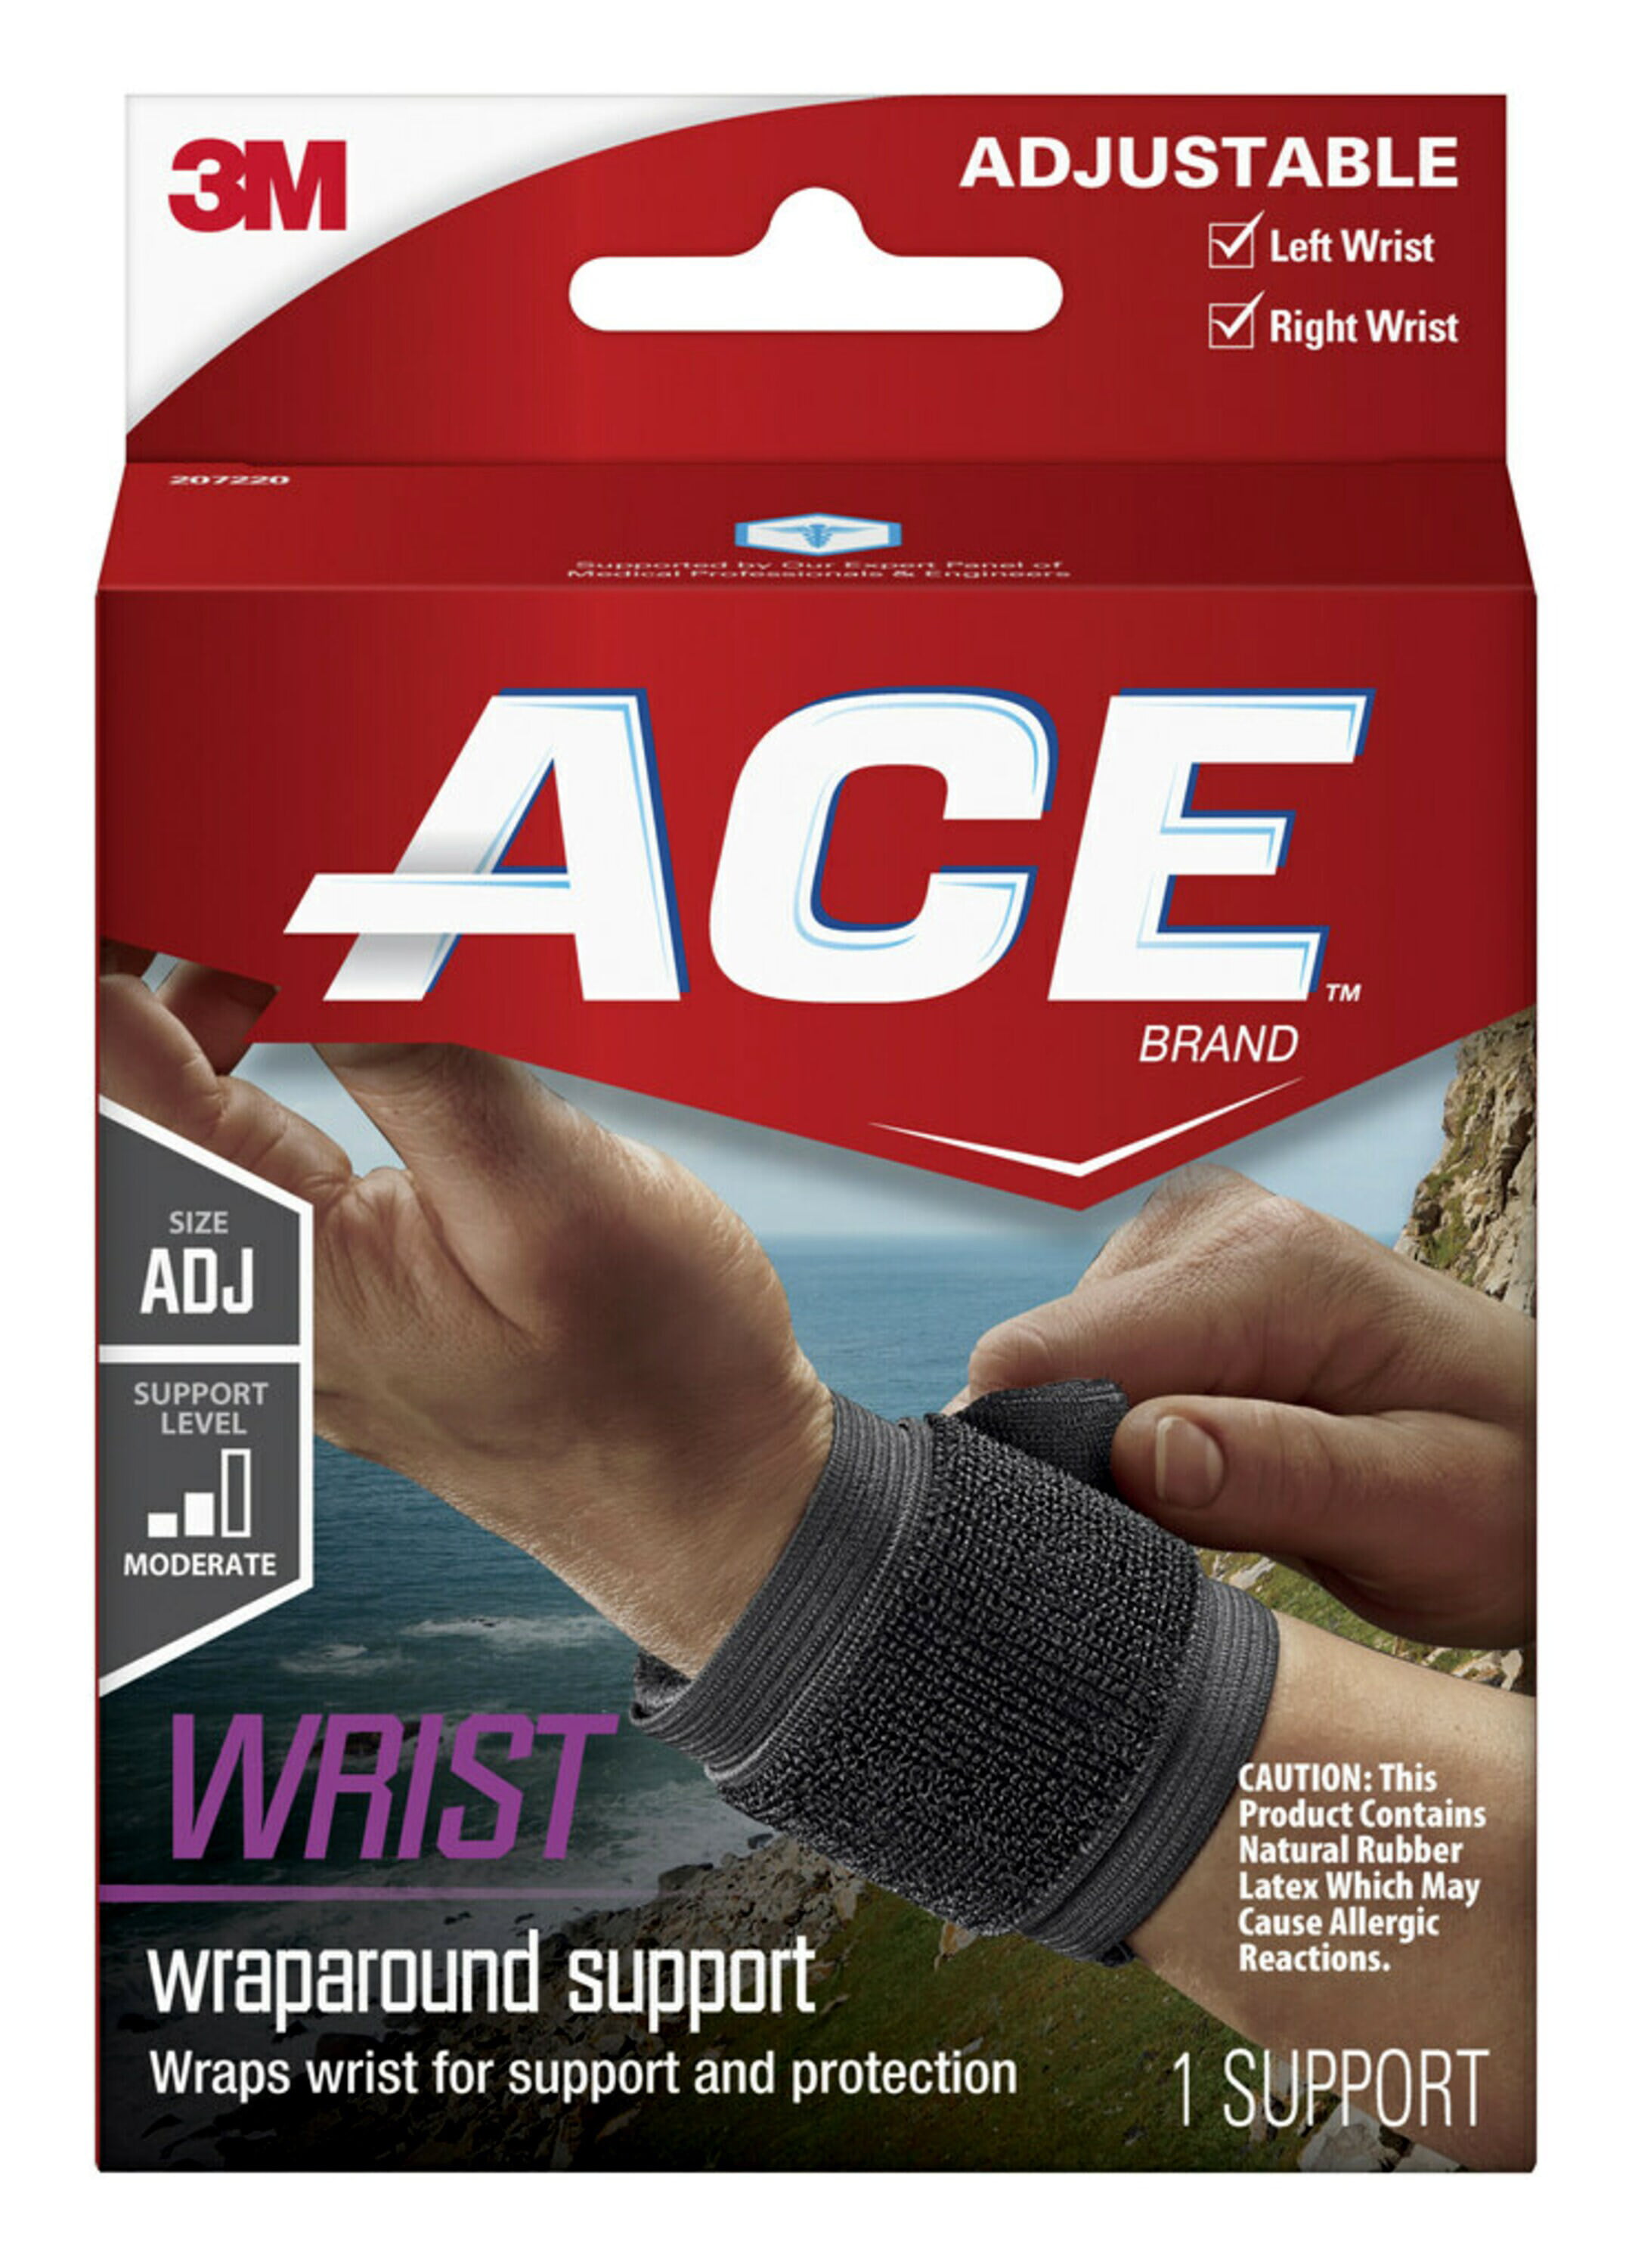 Protect wrists bandage protection cuffs suitable right or left 